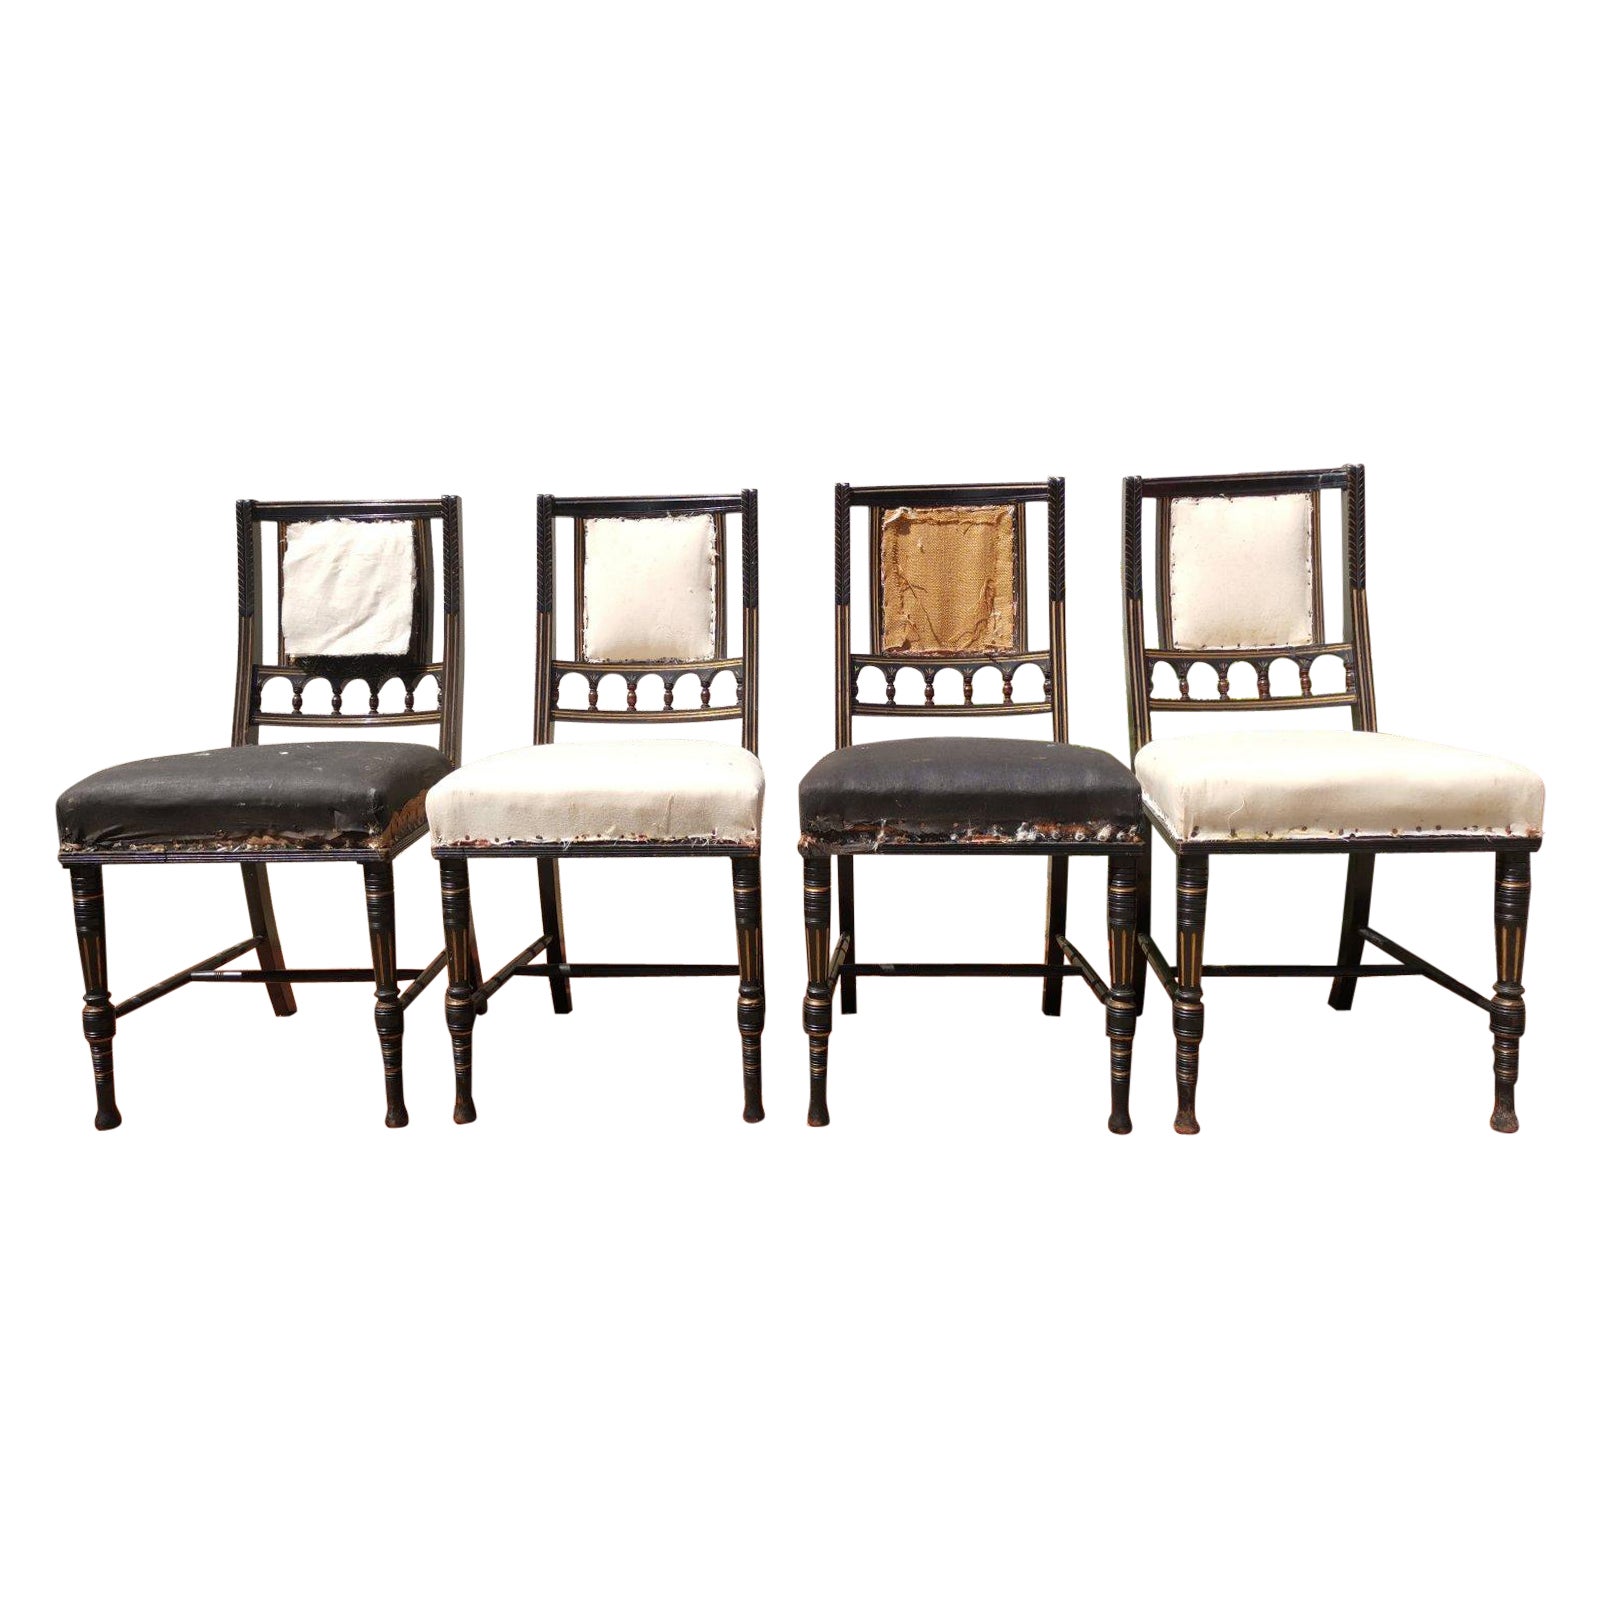 Bruce Talbert. Gillows, Four Aesthetic Movement Ebonised & Gilt Dining Chairs